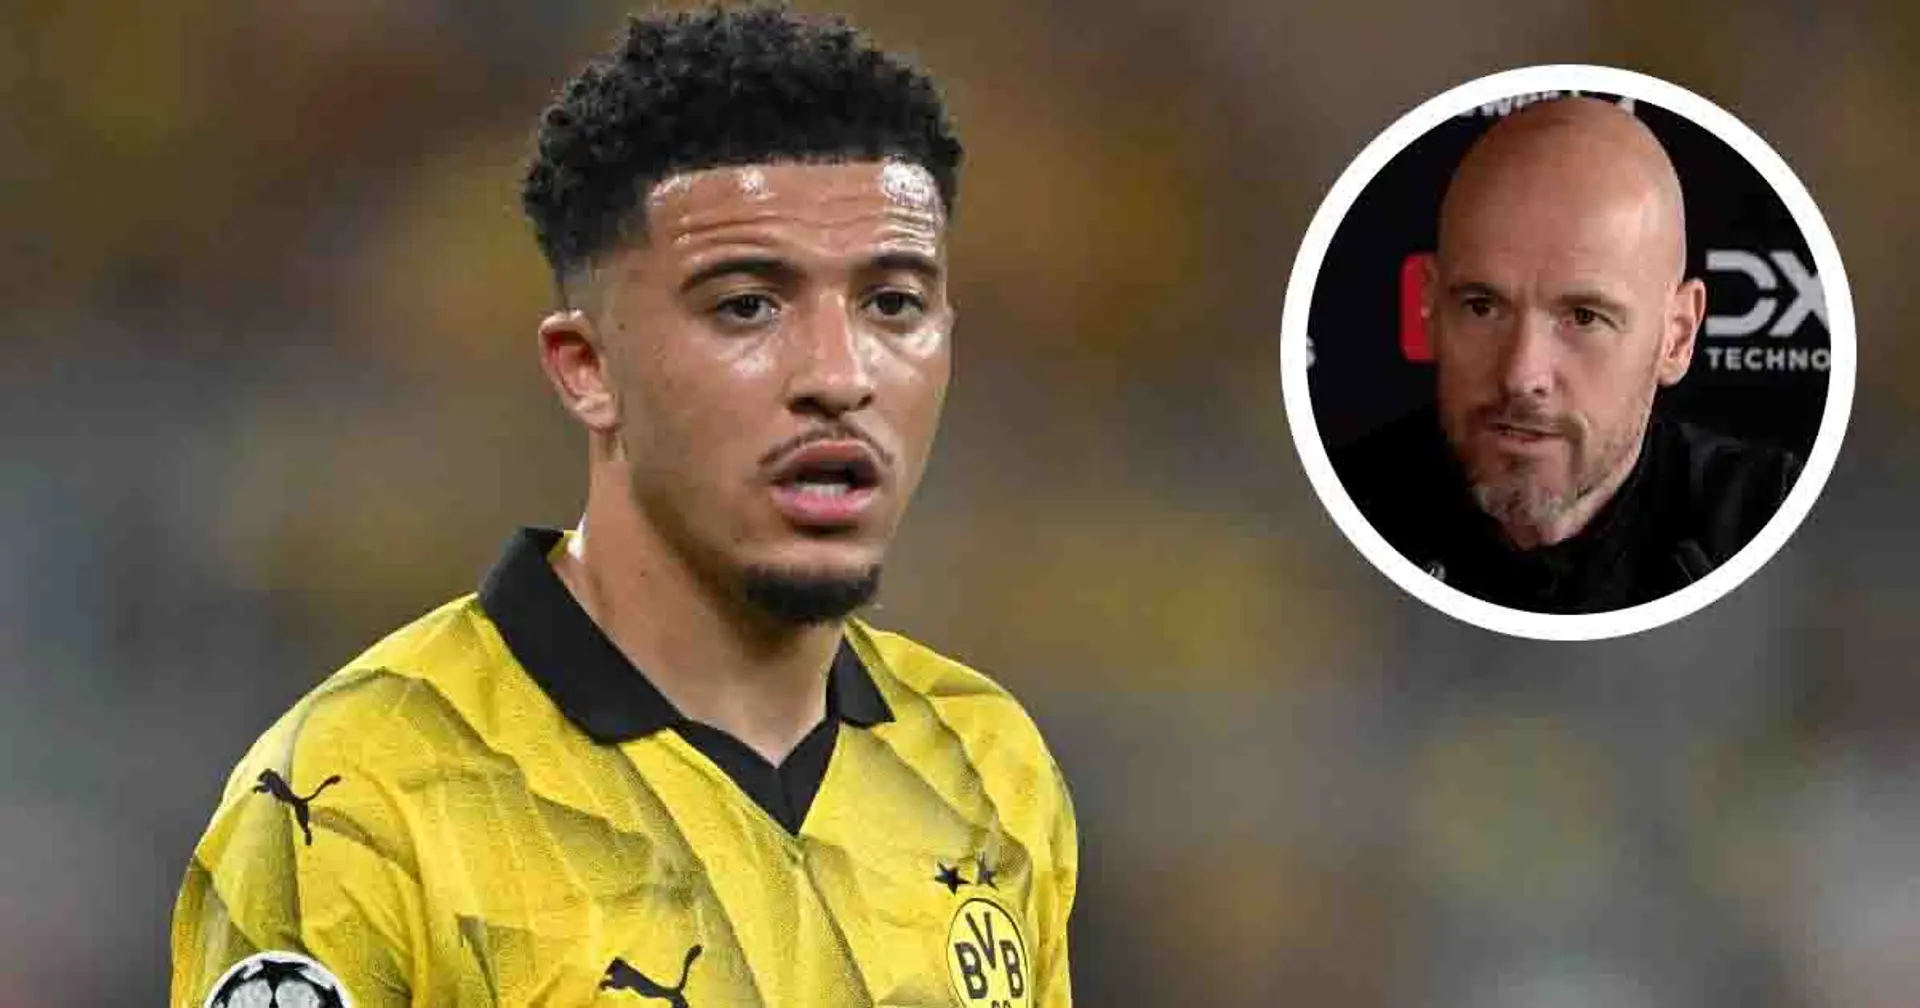 'We have a visit with him': Ten Hag explains how Man United are dealing with Sancho after UCL heroics